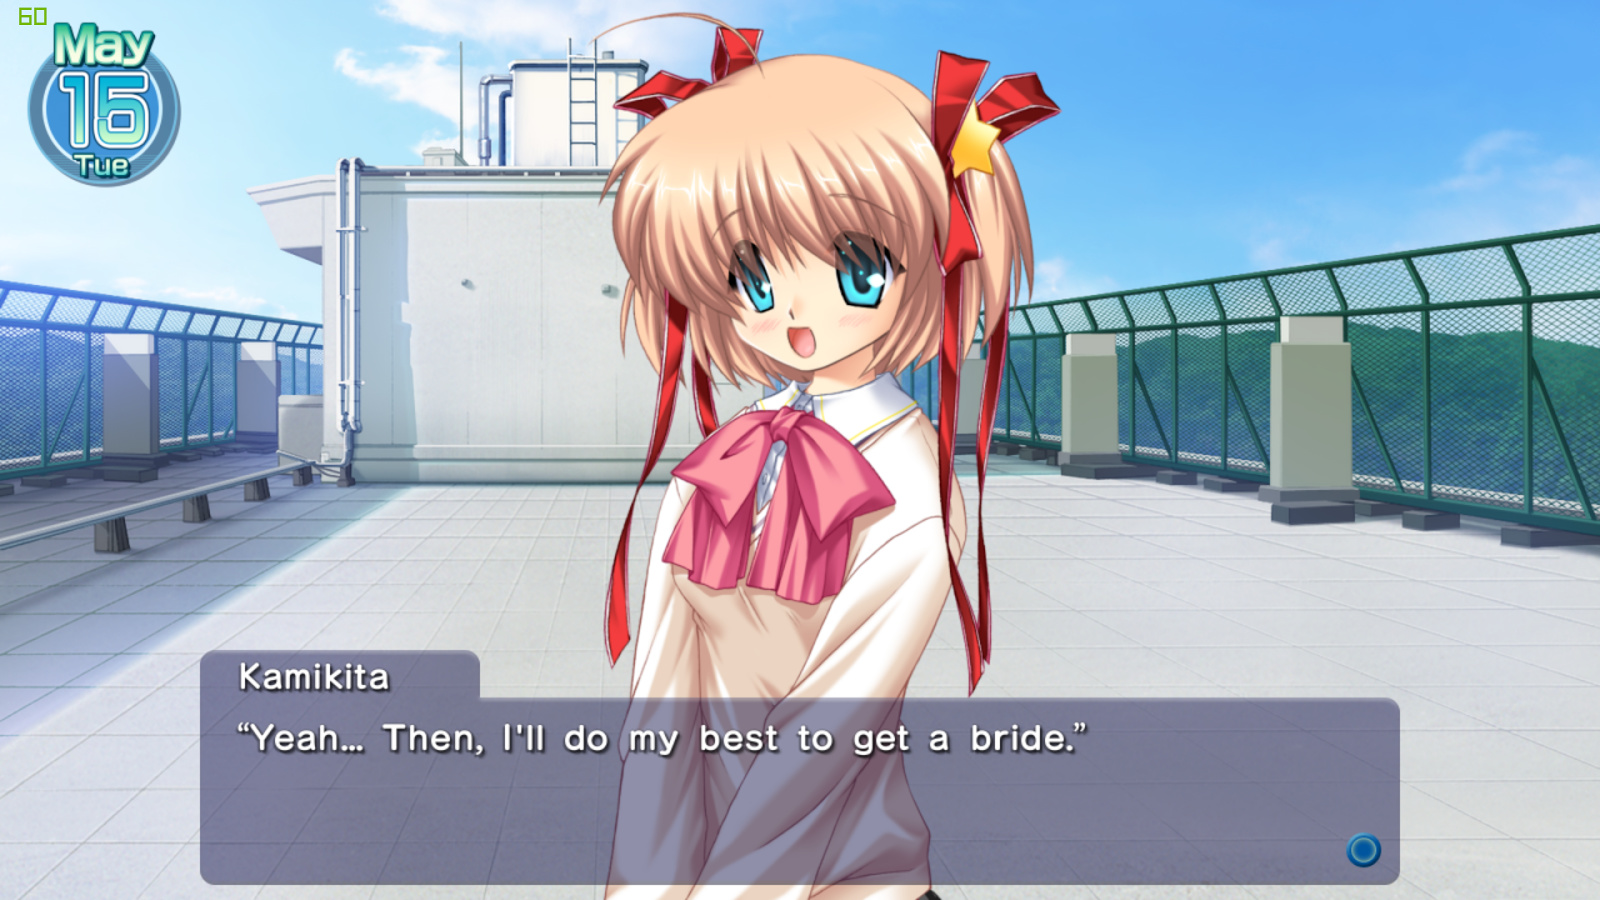 Little Busters Common Route Discussion Key Discussion Images, Photos, Reviews